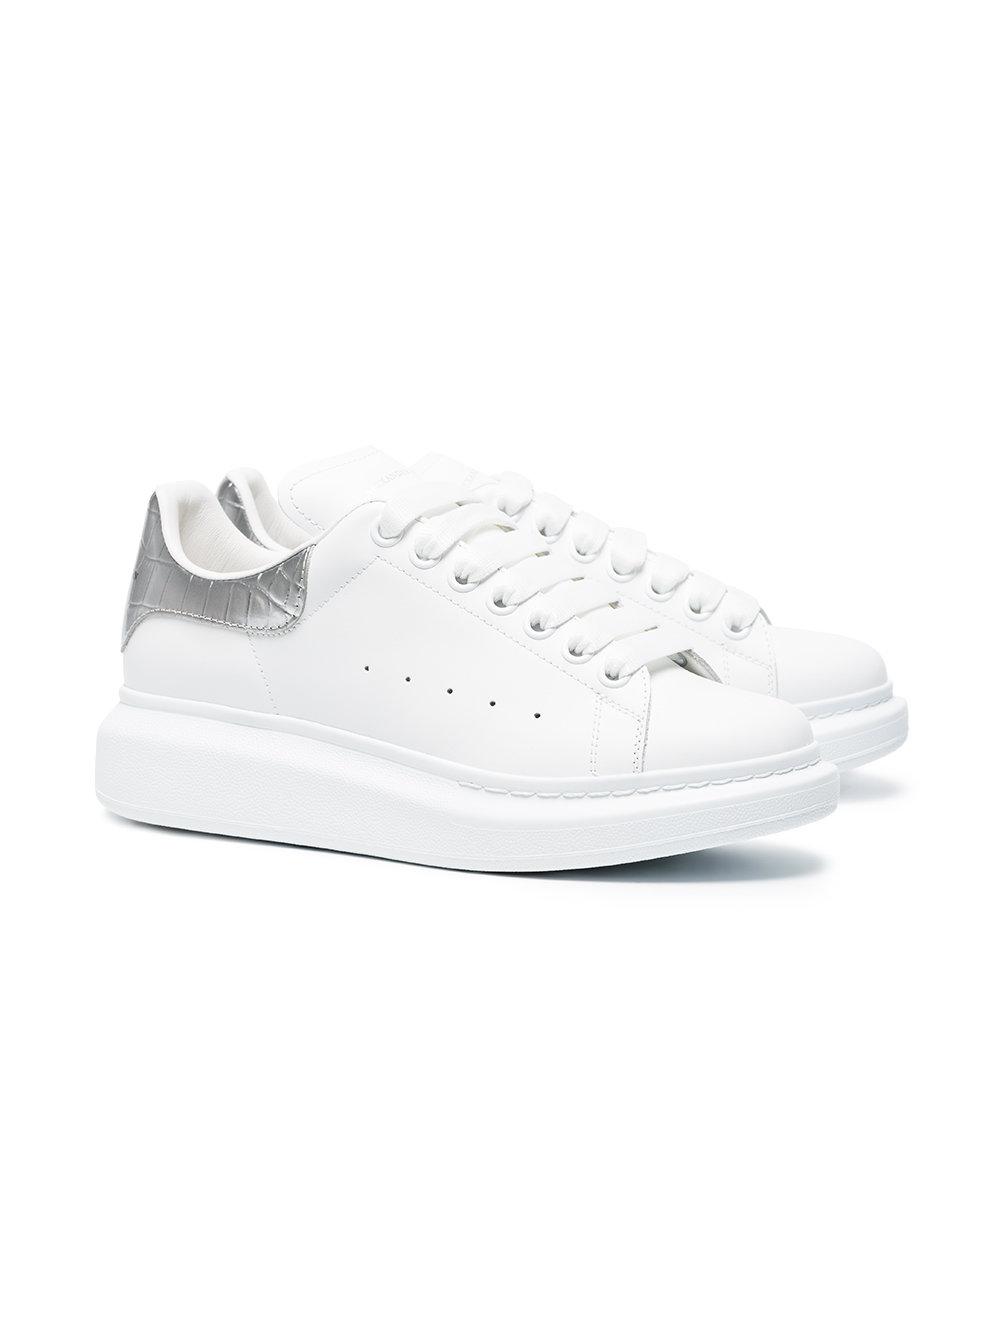 white and silver alexander mcqueen sneakers